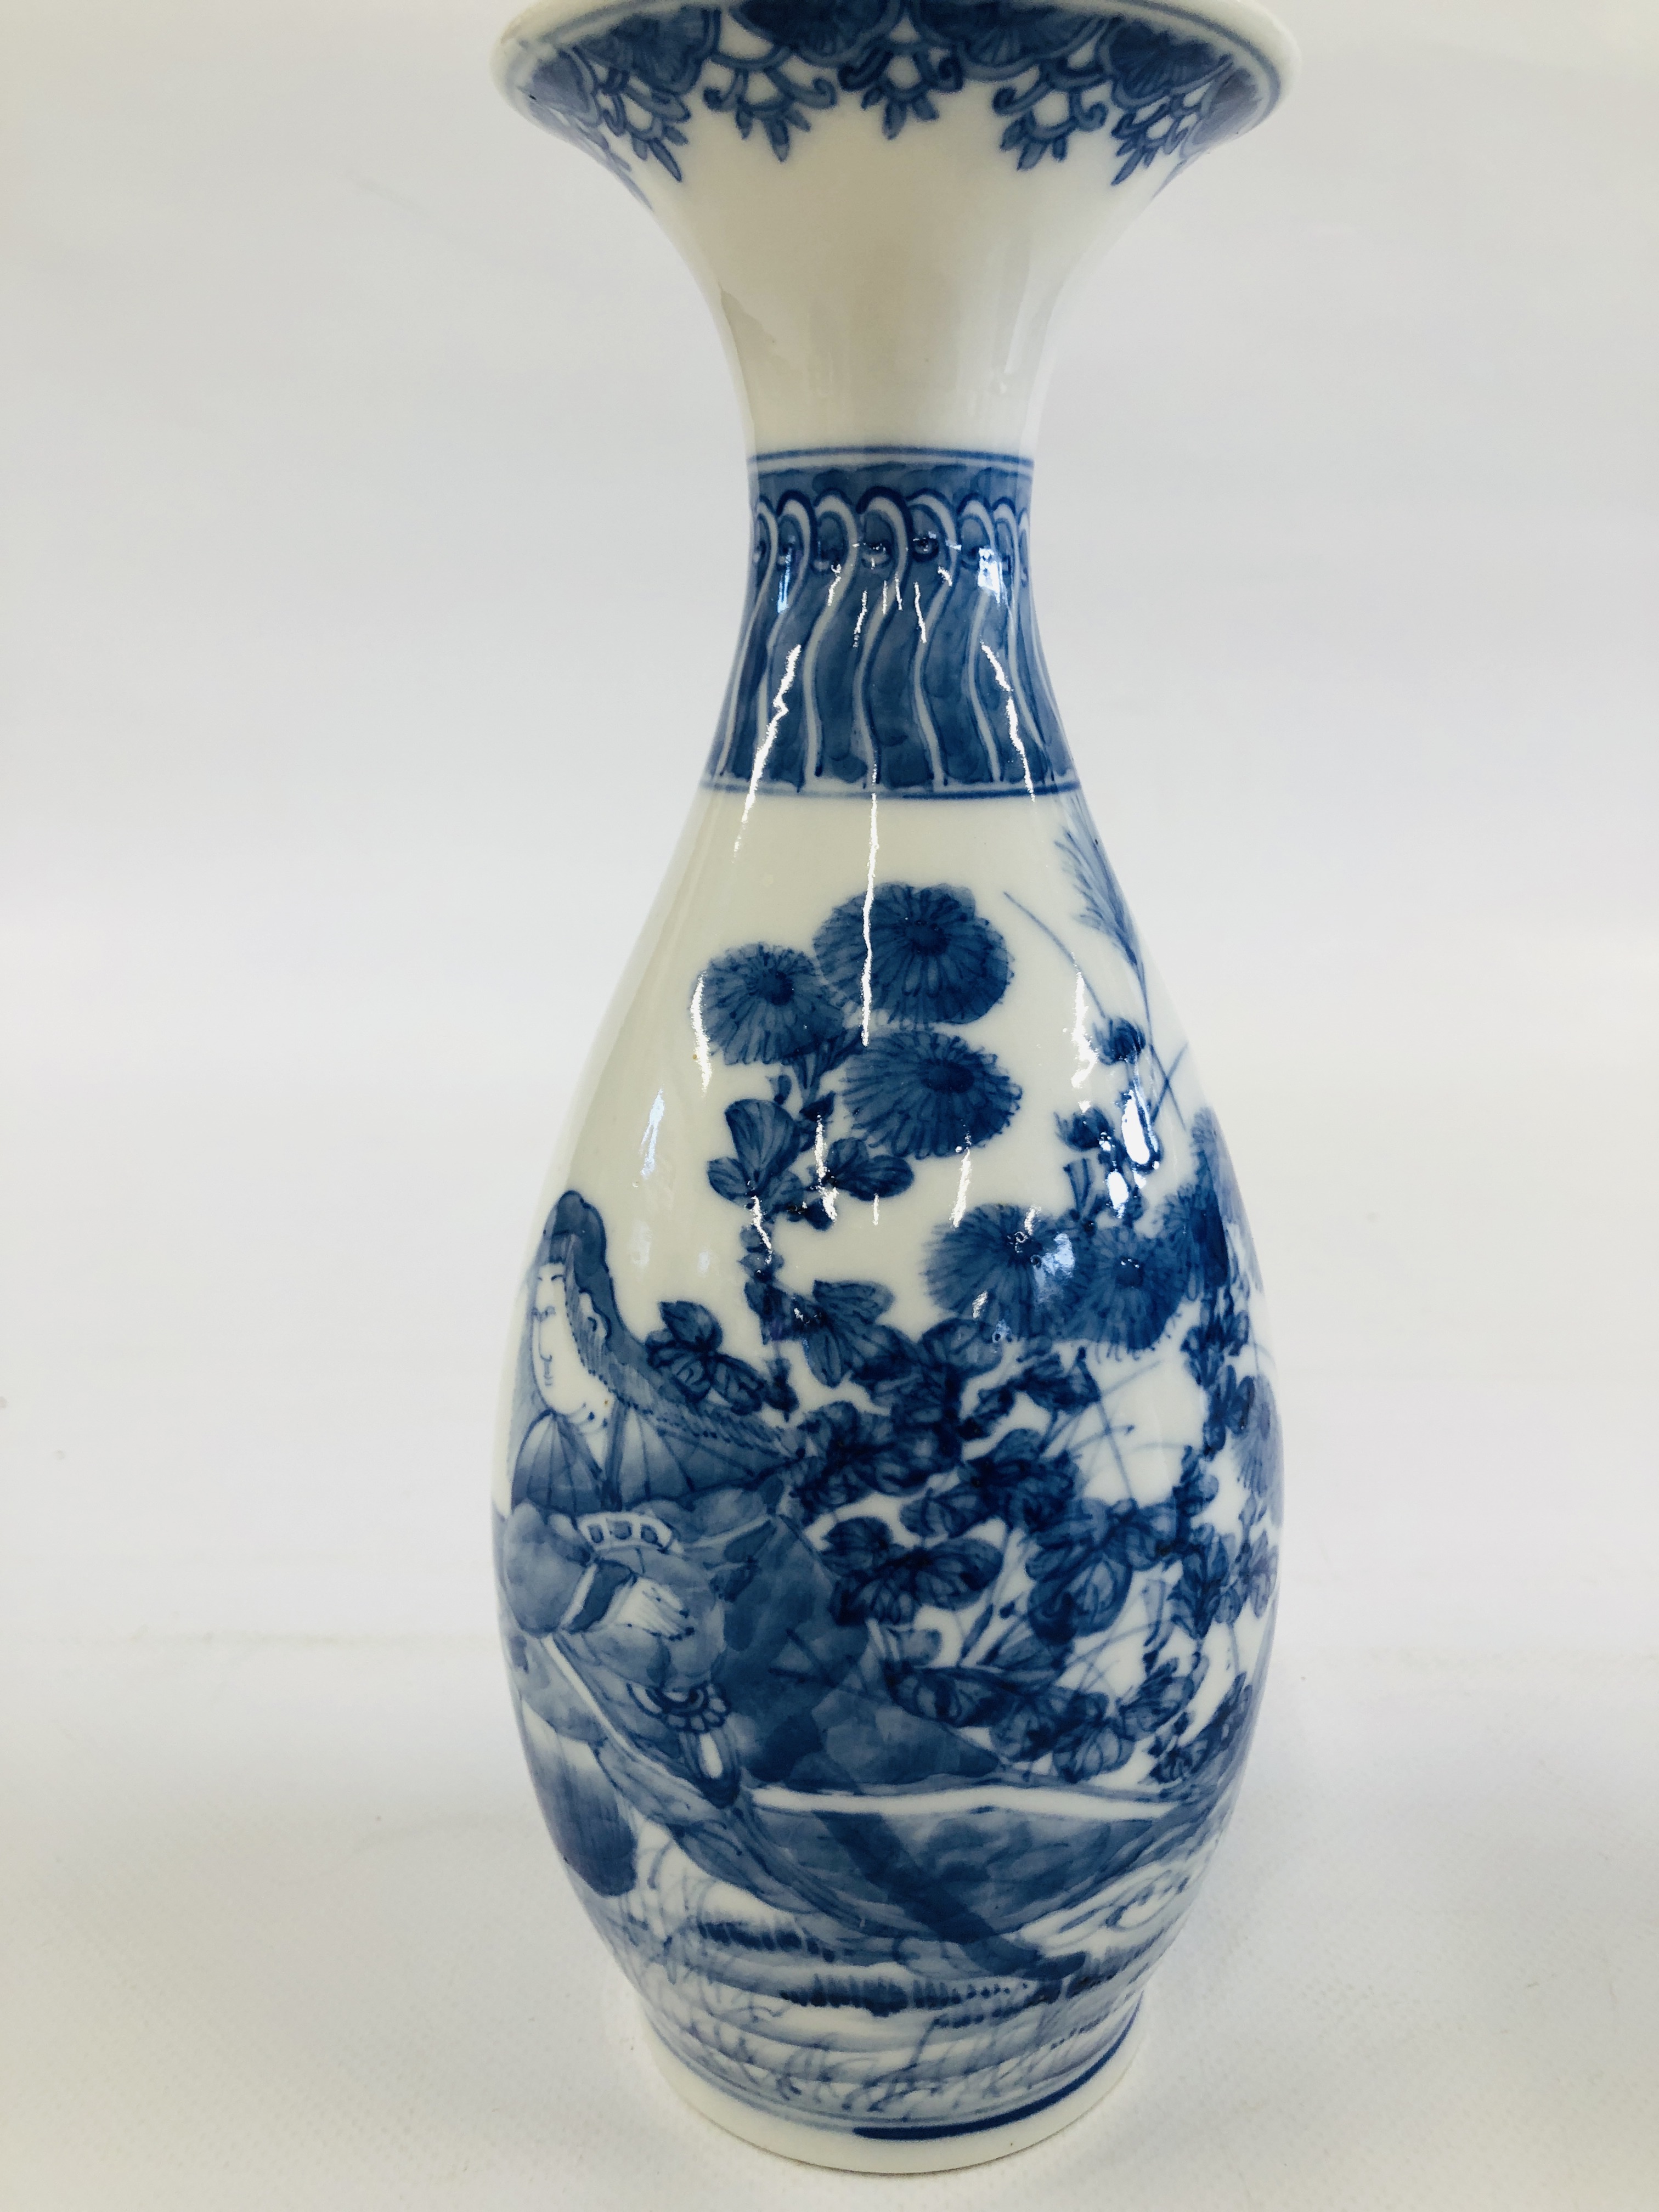 A PAIR OF DECORATIVE BLUE AND WHITE ORIENTAL VASES DEPICTING A PREGNANT WOMAN SEATED AMONGST THE - Image 10 of 13